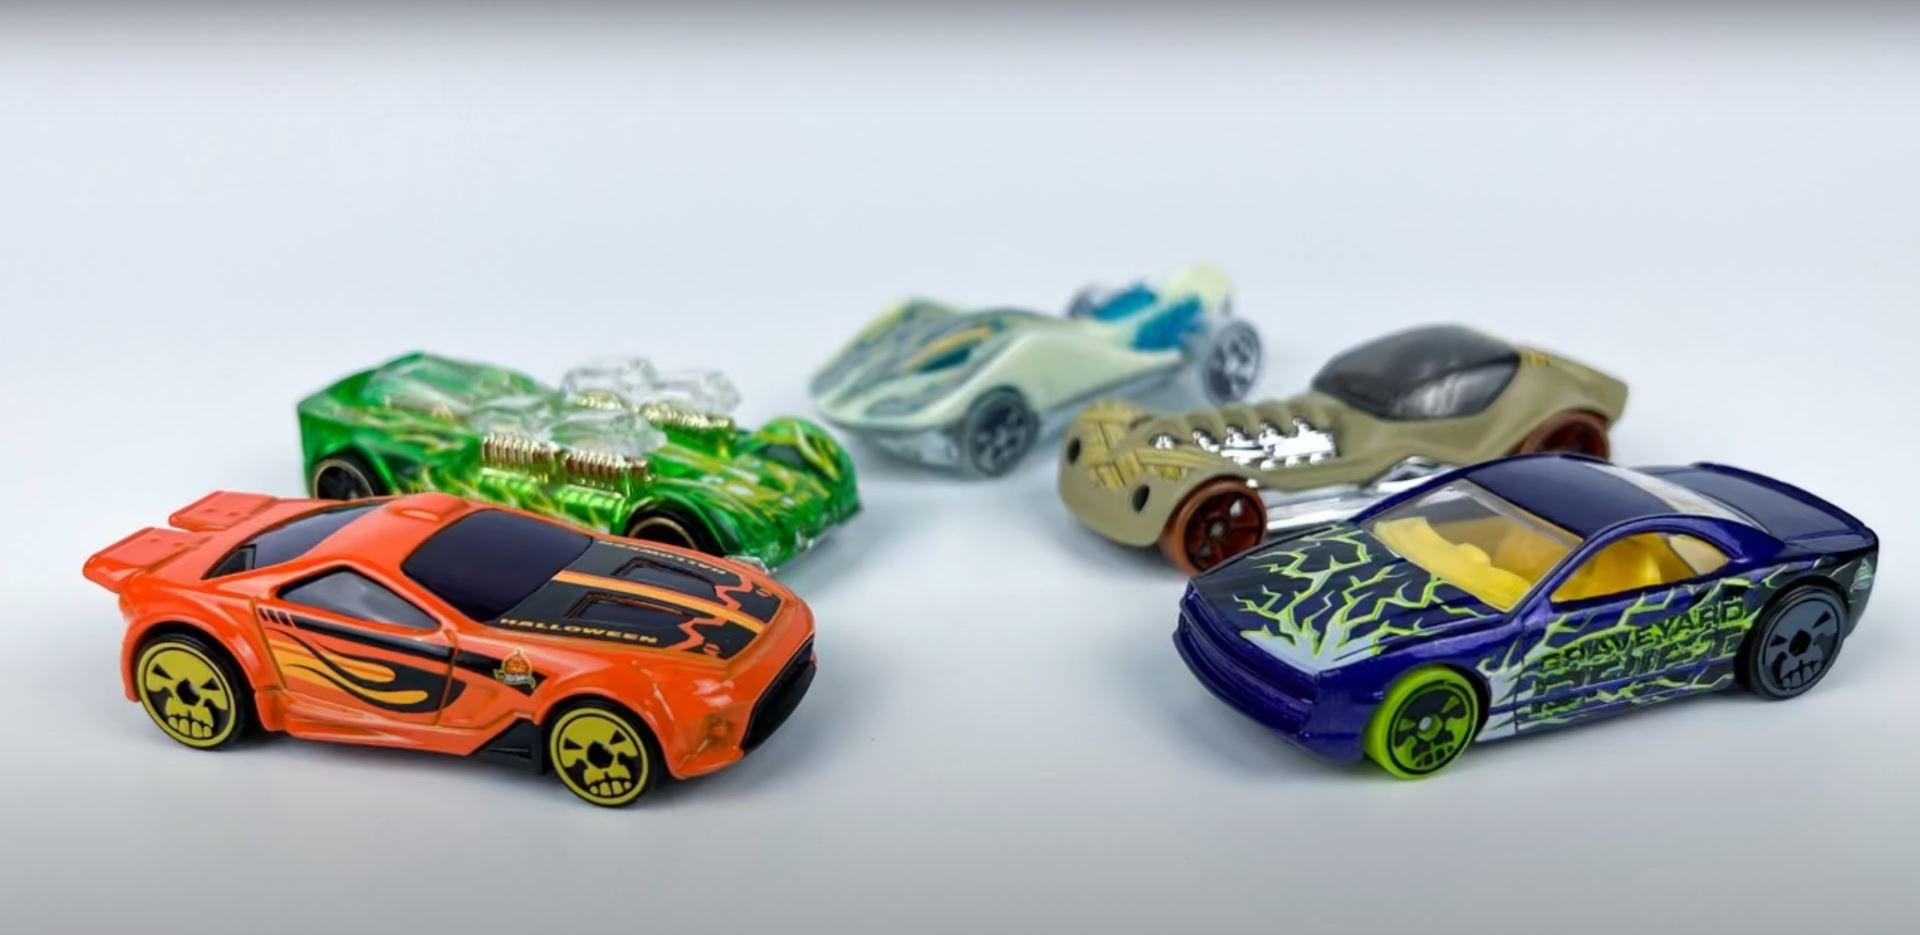 It's Trick or Treat Time With Set of Five Hot Wheels Fantasy Cars -  autoevolution